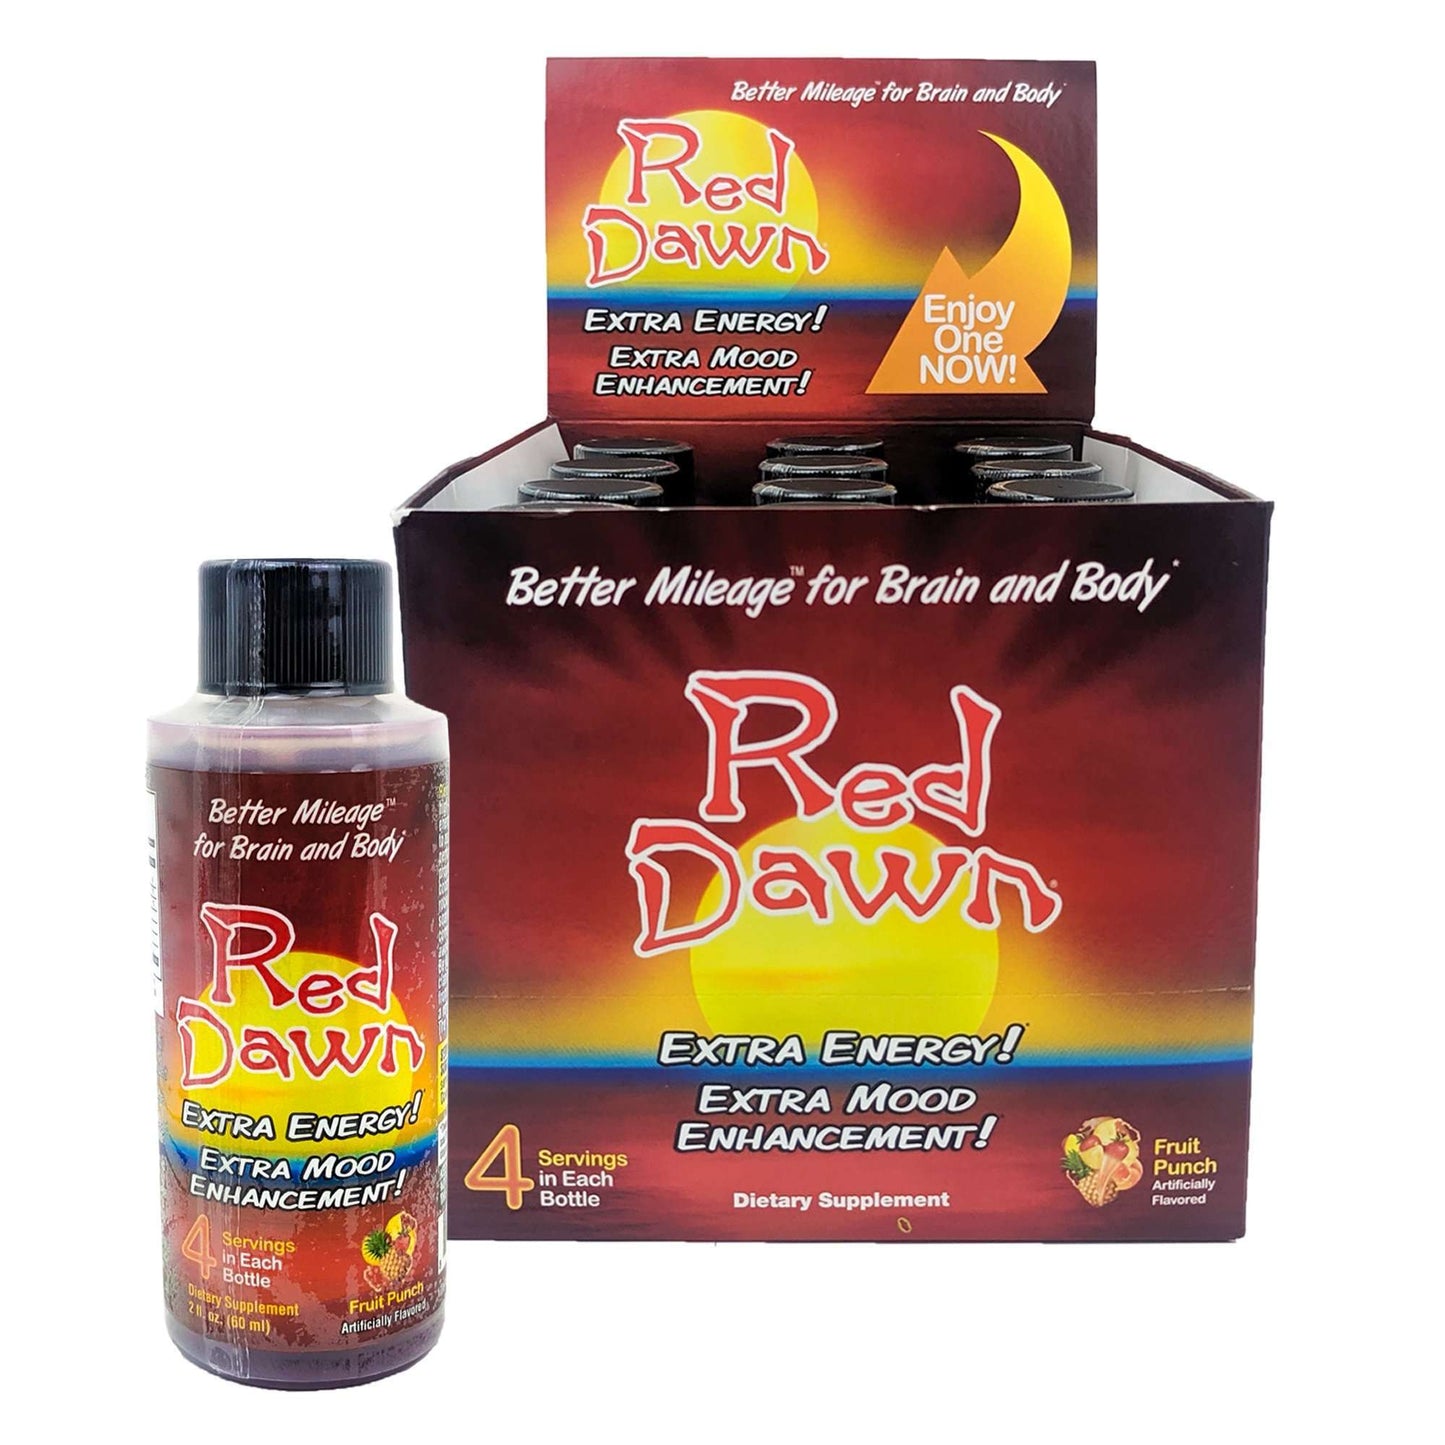 Red Dawn Energy Drink Shots 2oz, Fruit Punch Flavor, Box of 12